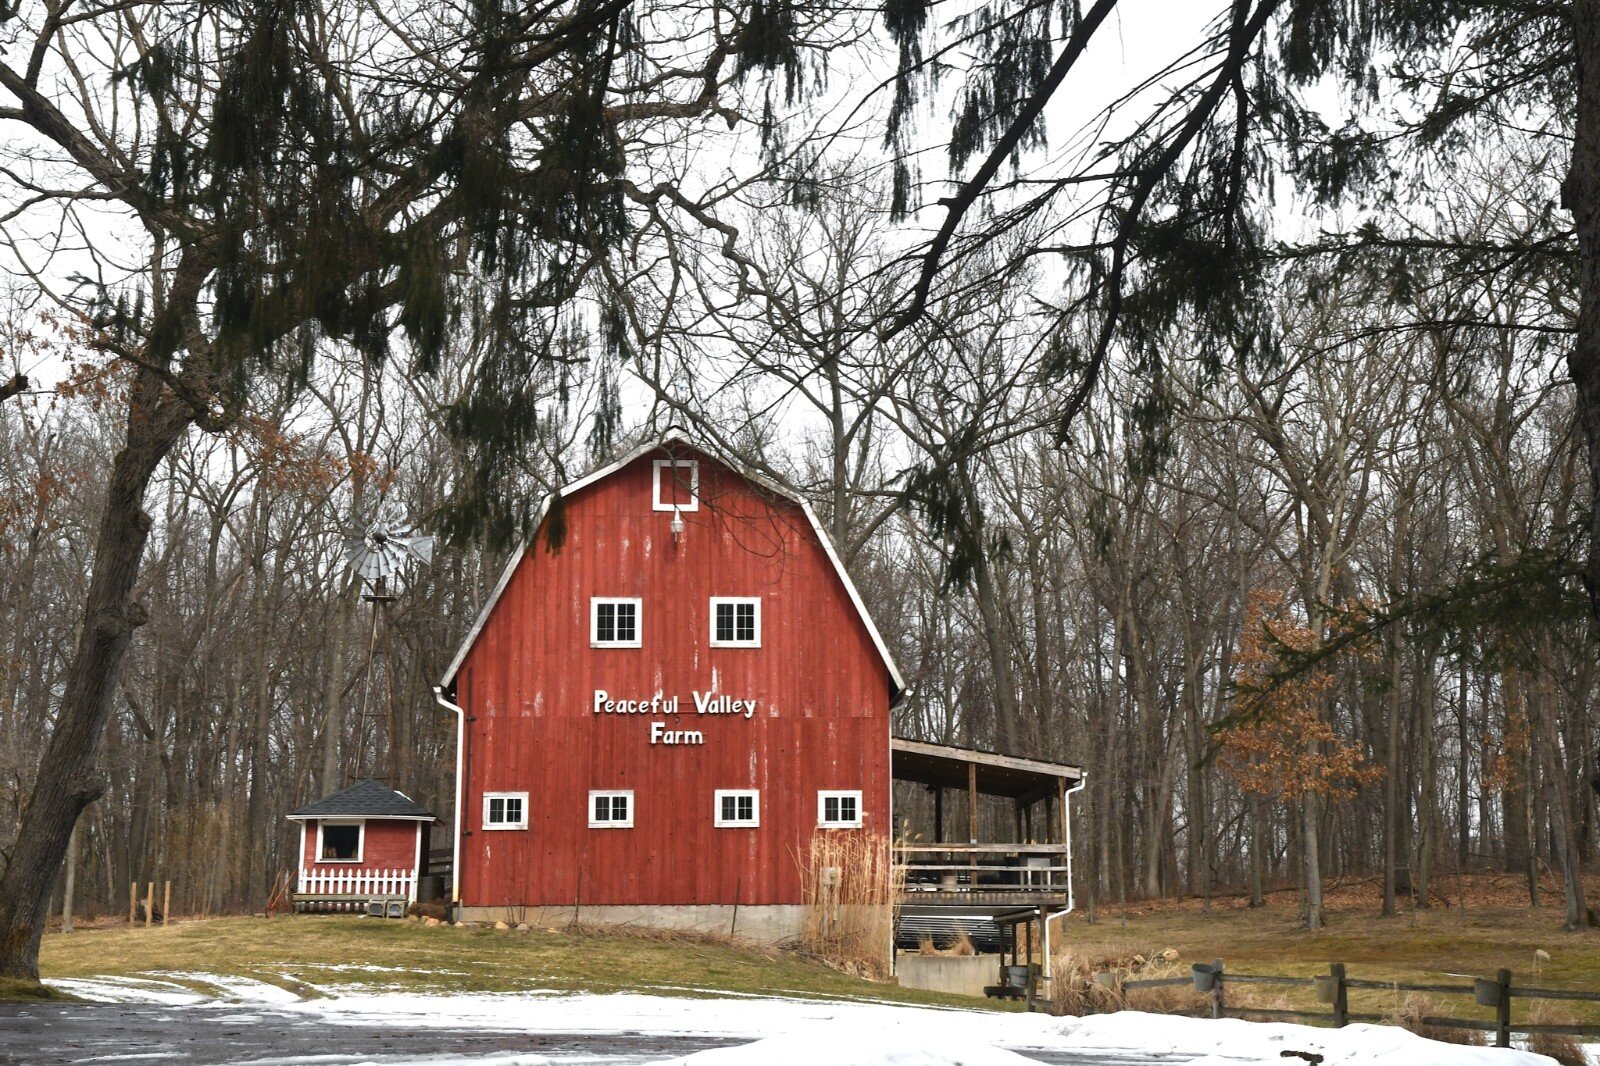 A view of the exterior of the barn that A. J. Jones moved several years ago.